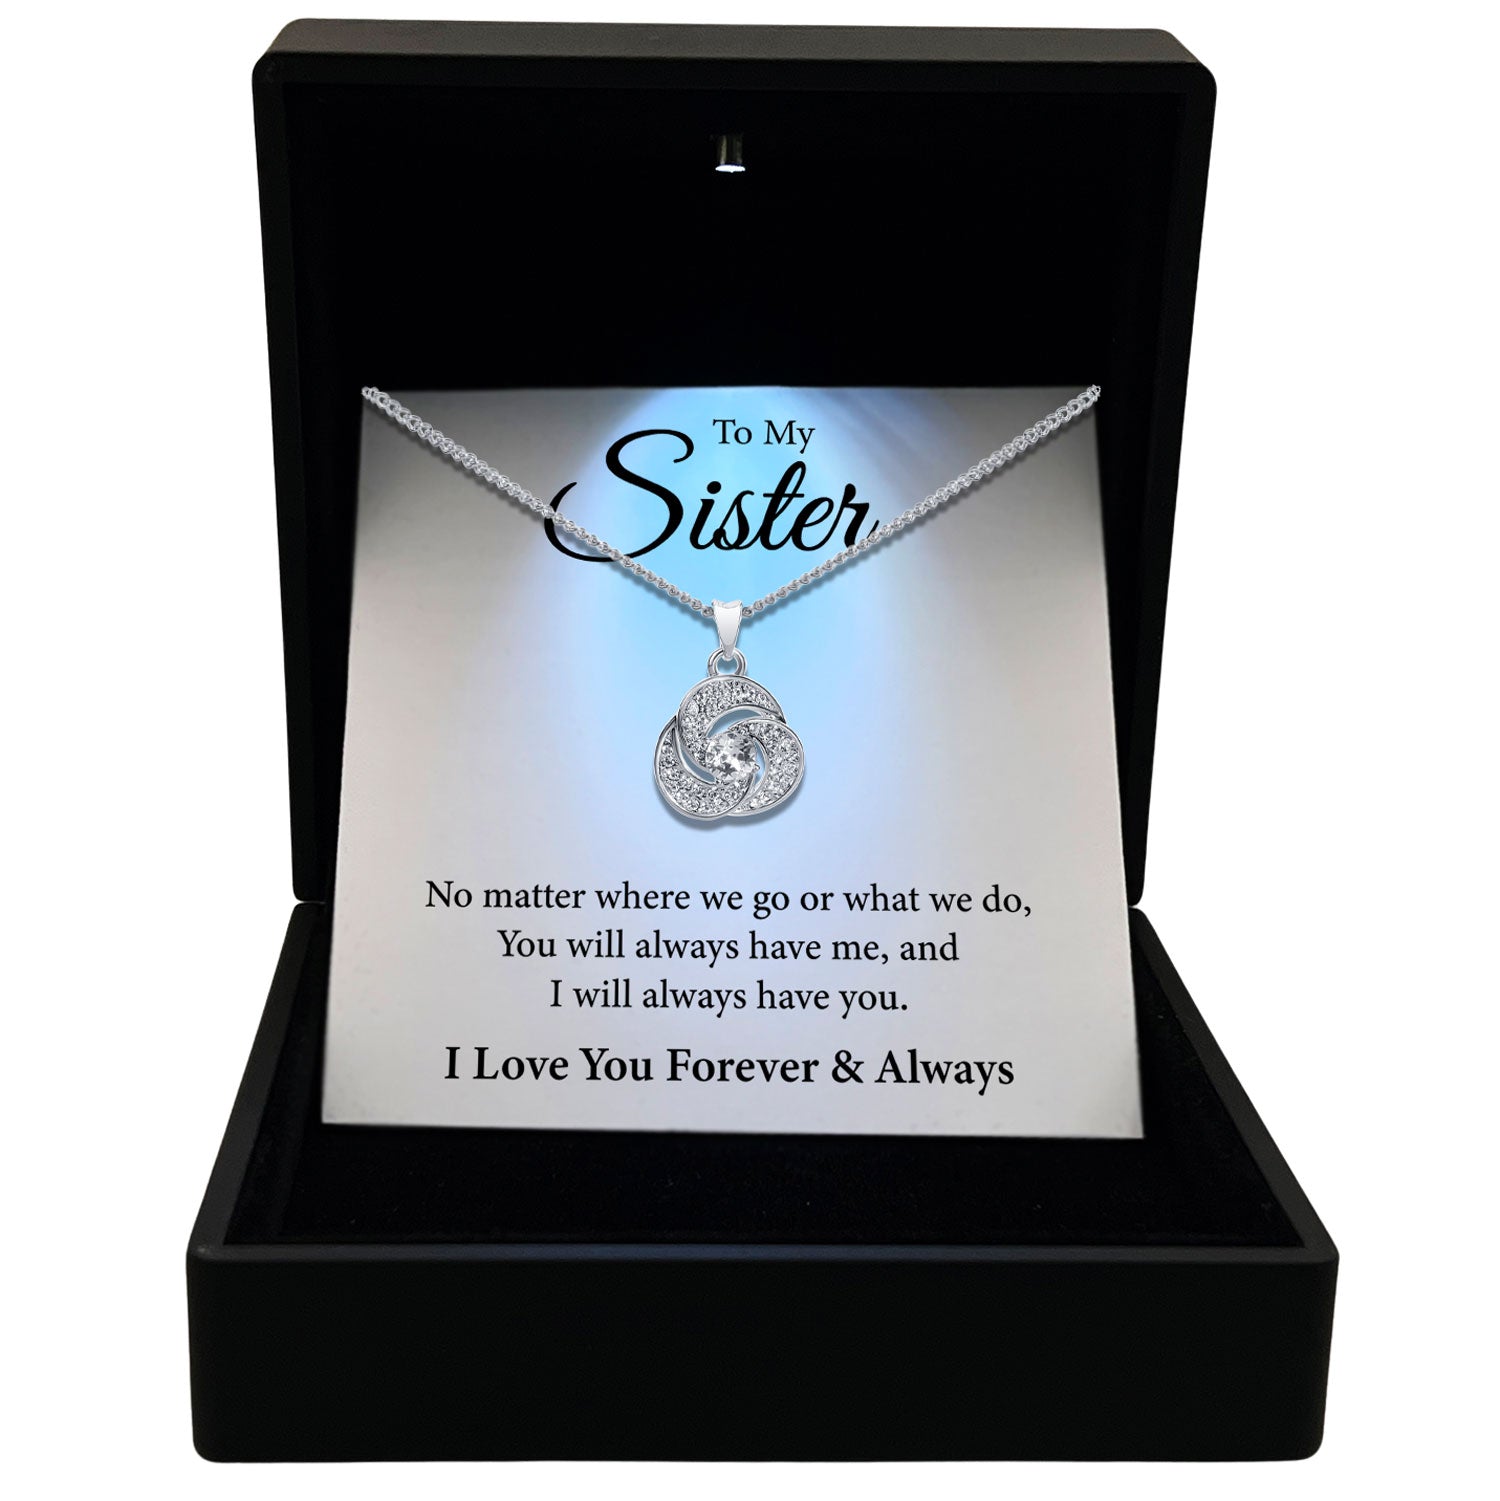 To My Sister - I Love You Forever & Always - Tryndi Love Knot Necklace